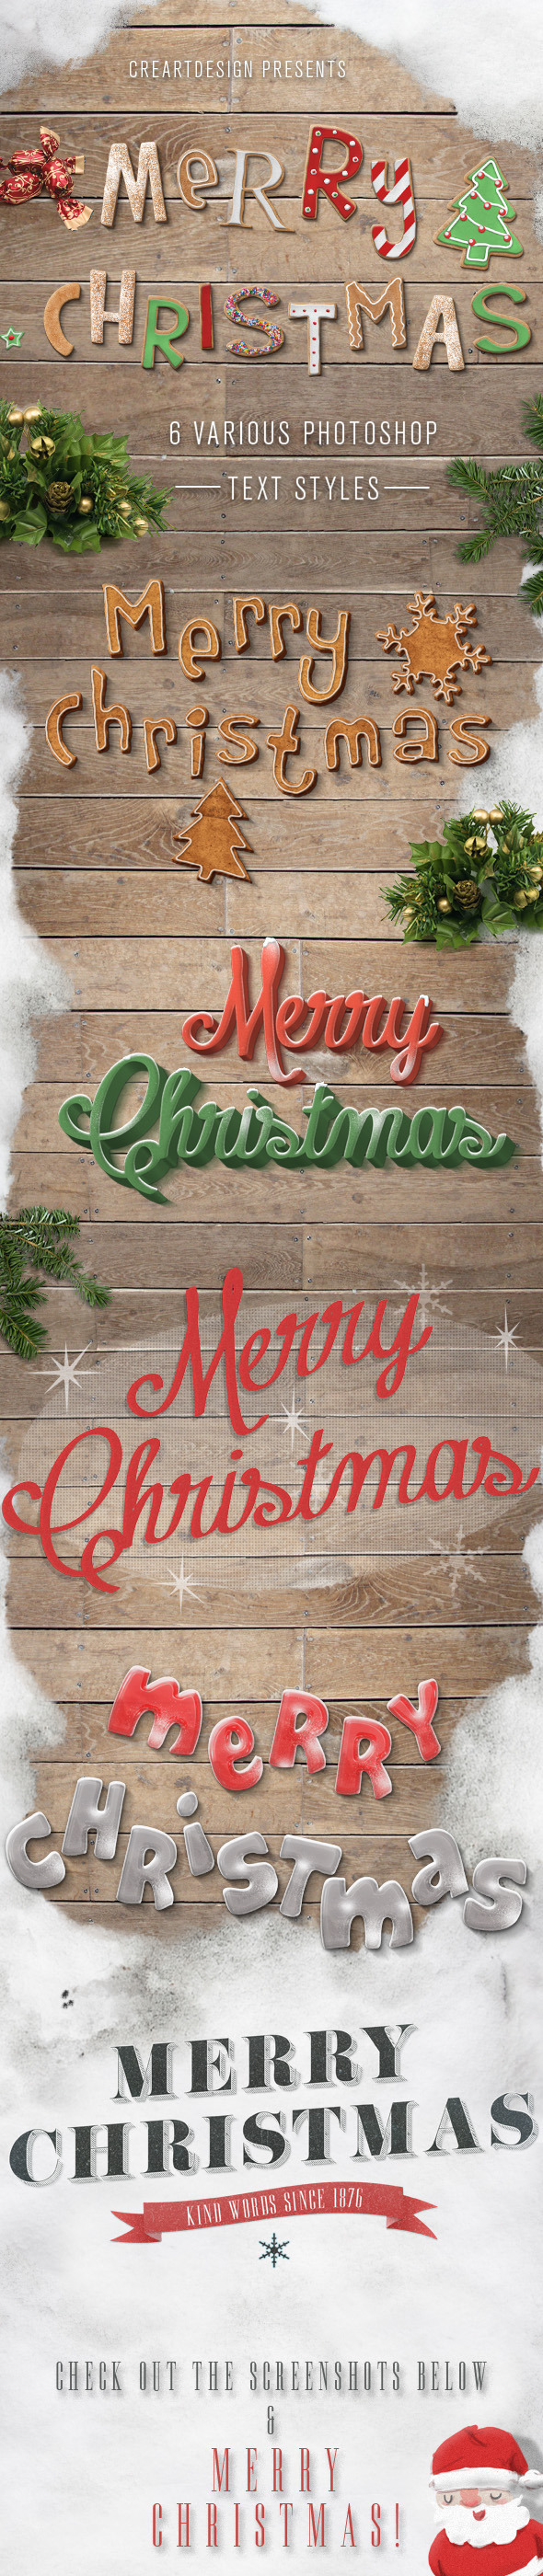 Christmas Text Effects And Styles for Photoshop